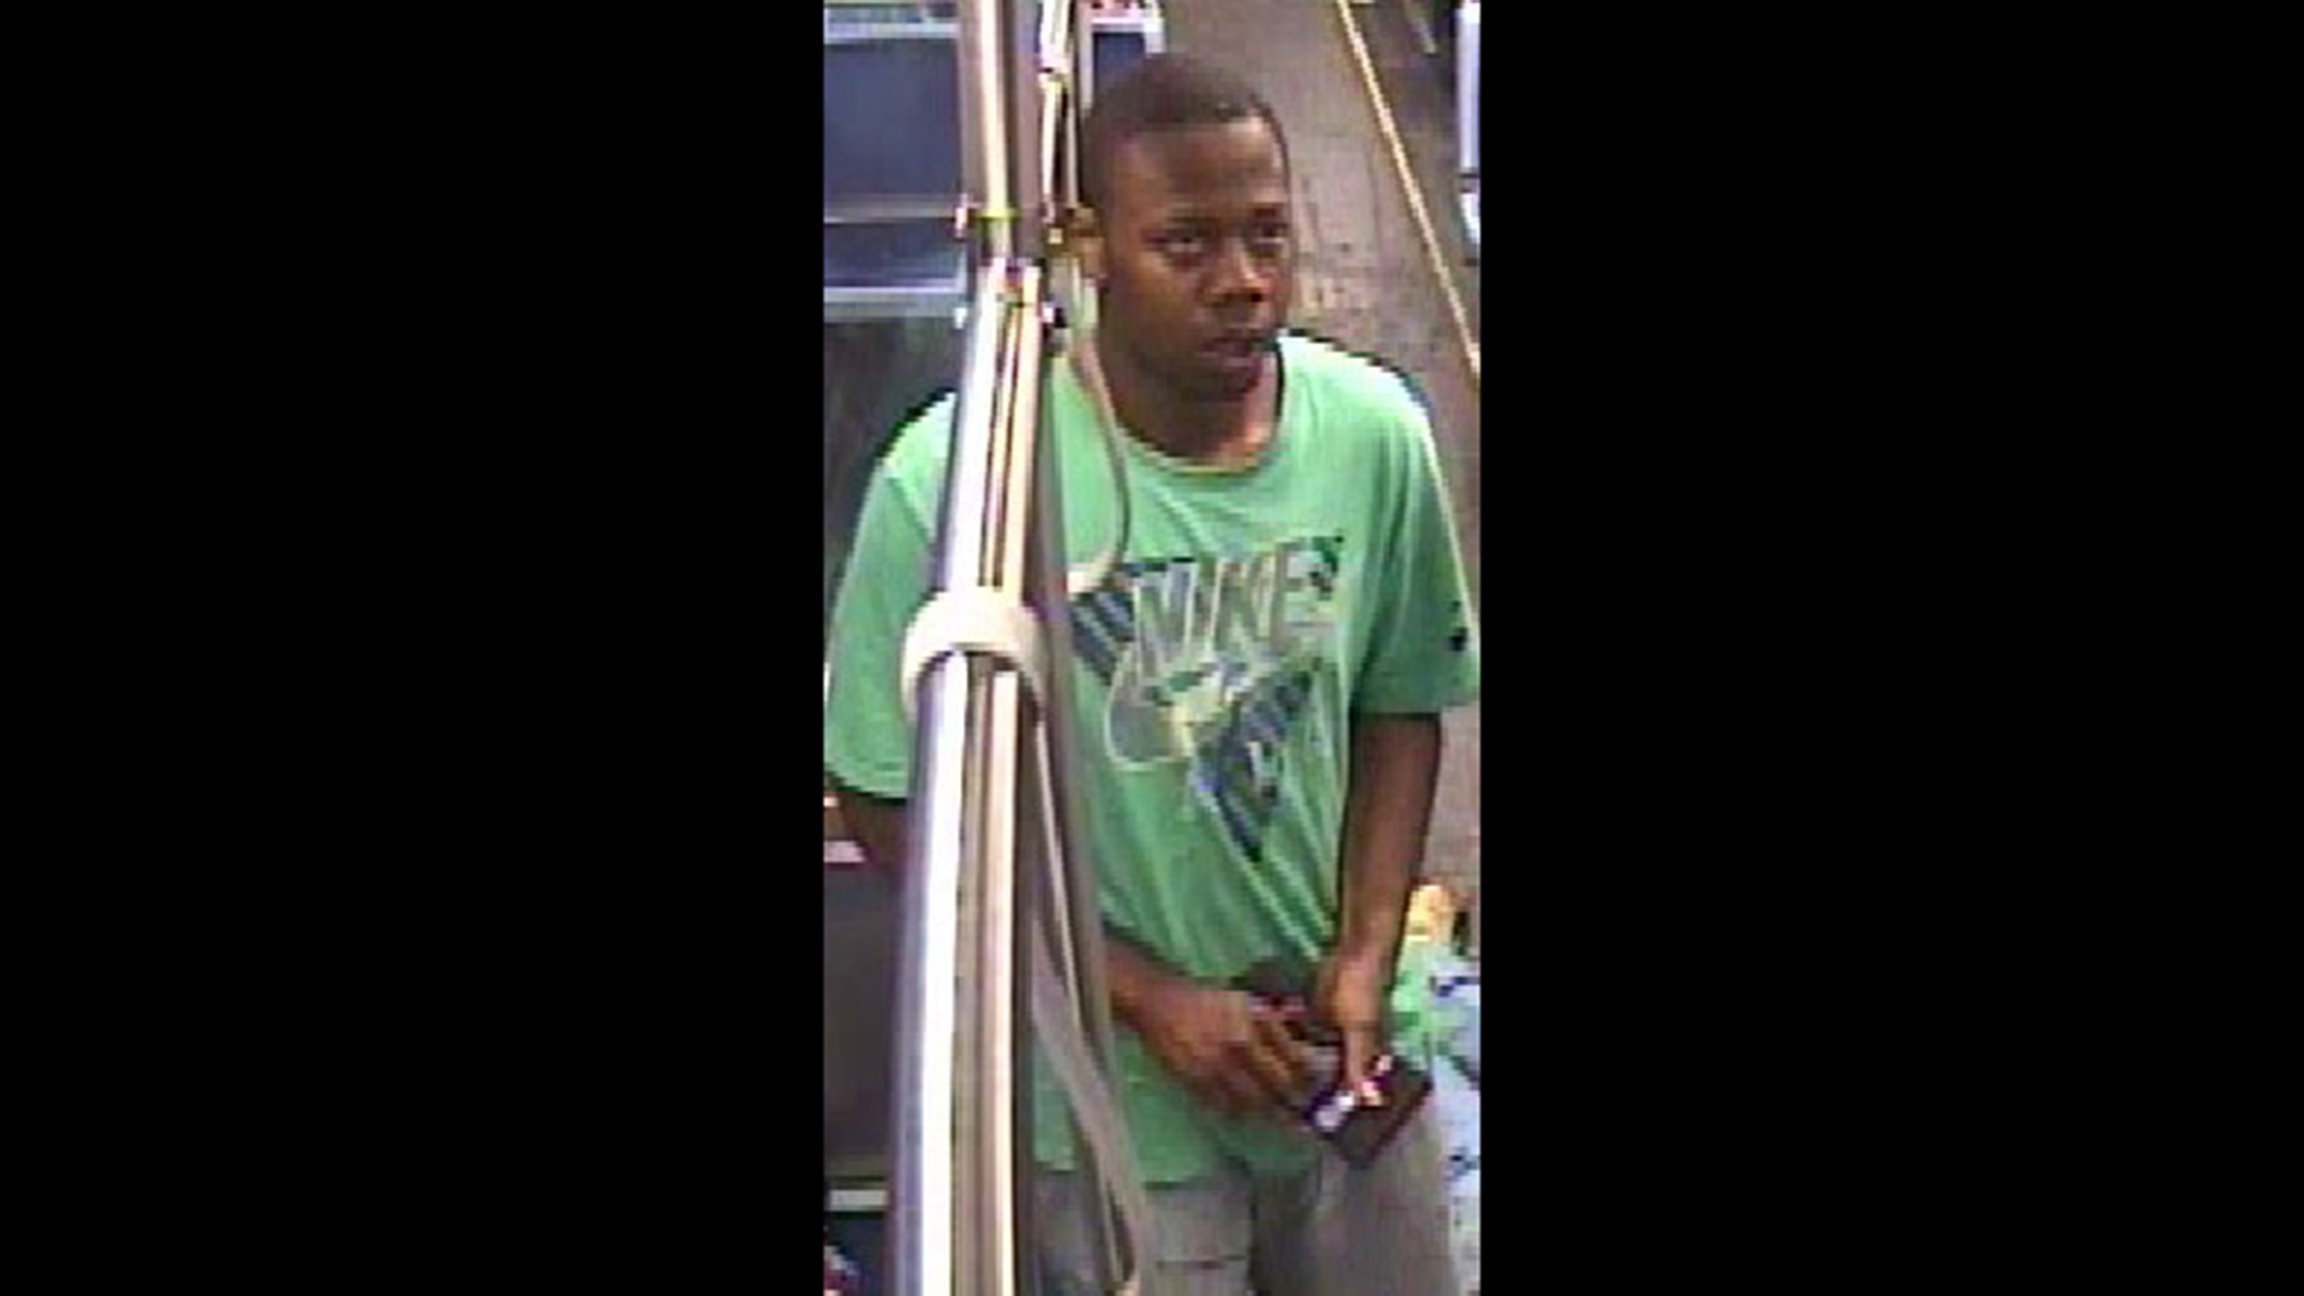 Chicago Police are seeking this man in connection with the battery and robbery of a 70-year-old man in August. (Chicago Police Department)